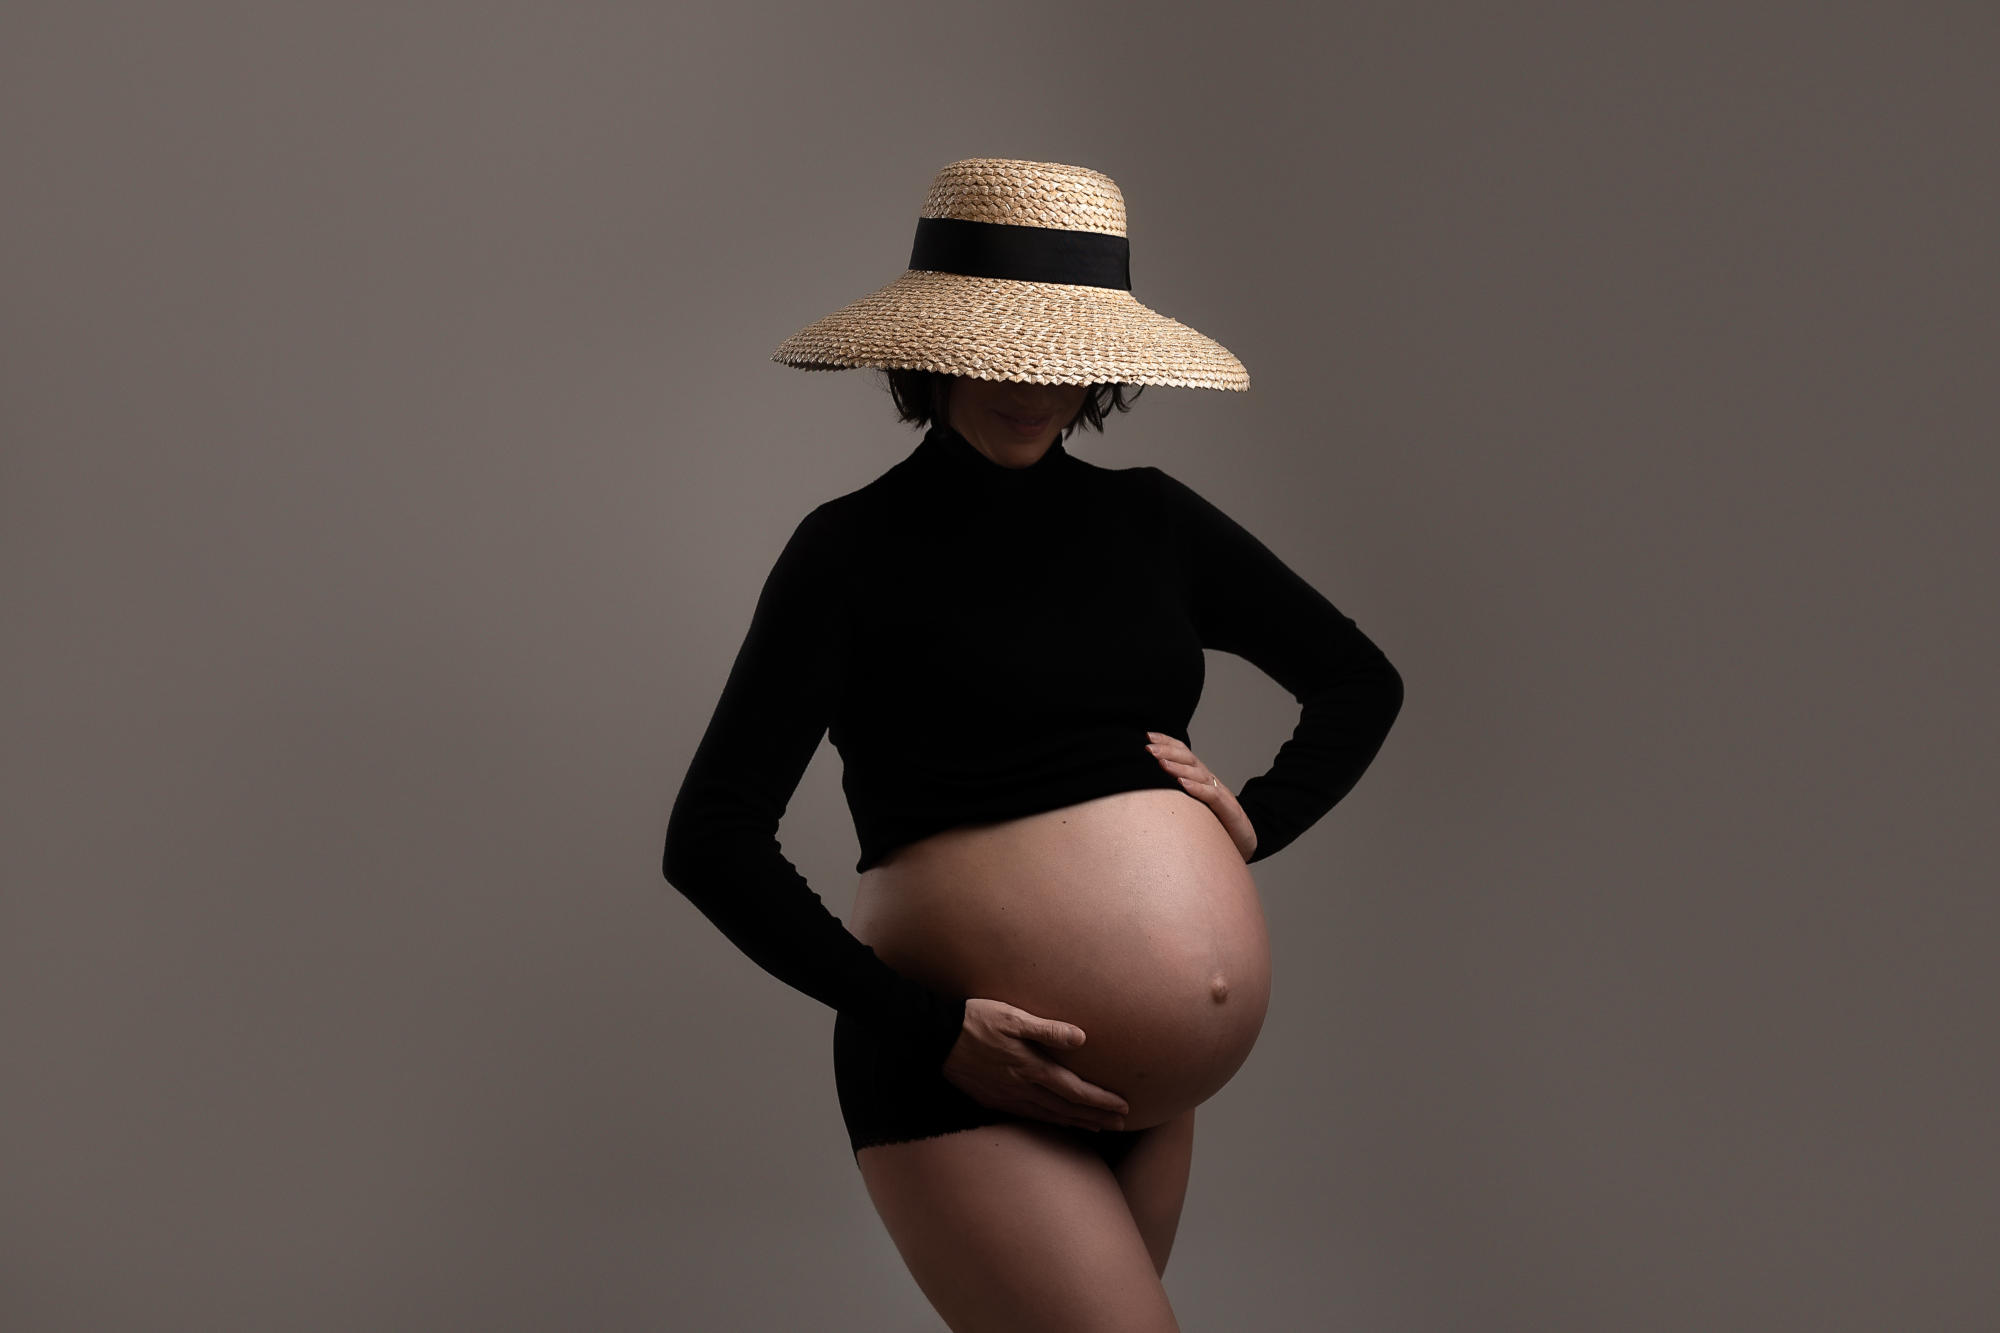 Classic, Simple Maternity and Pregnancy Photography Tianna J-Williams Birmingham